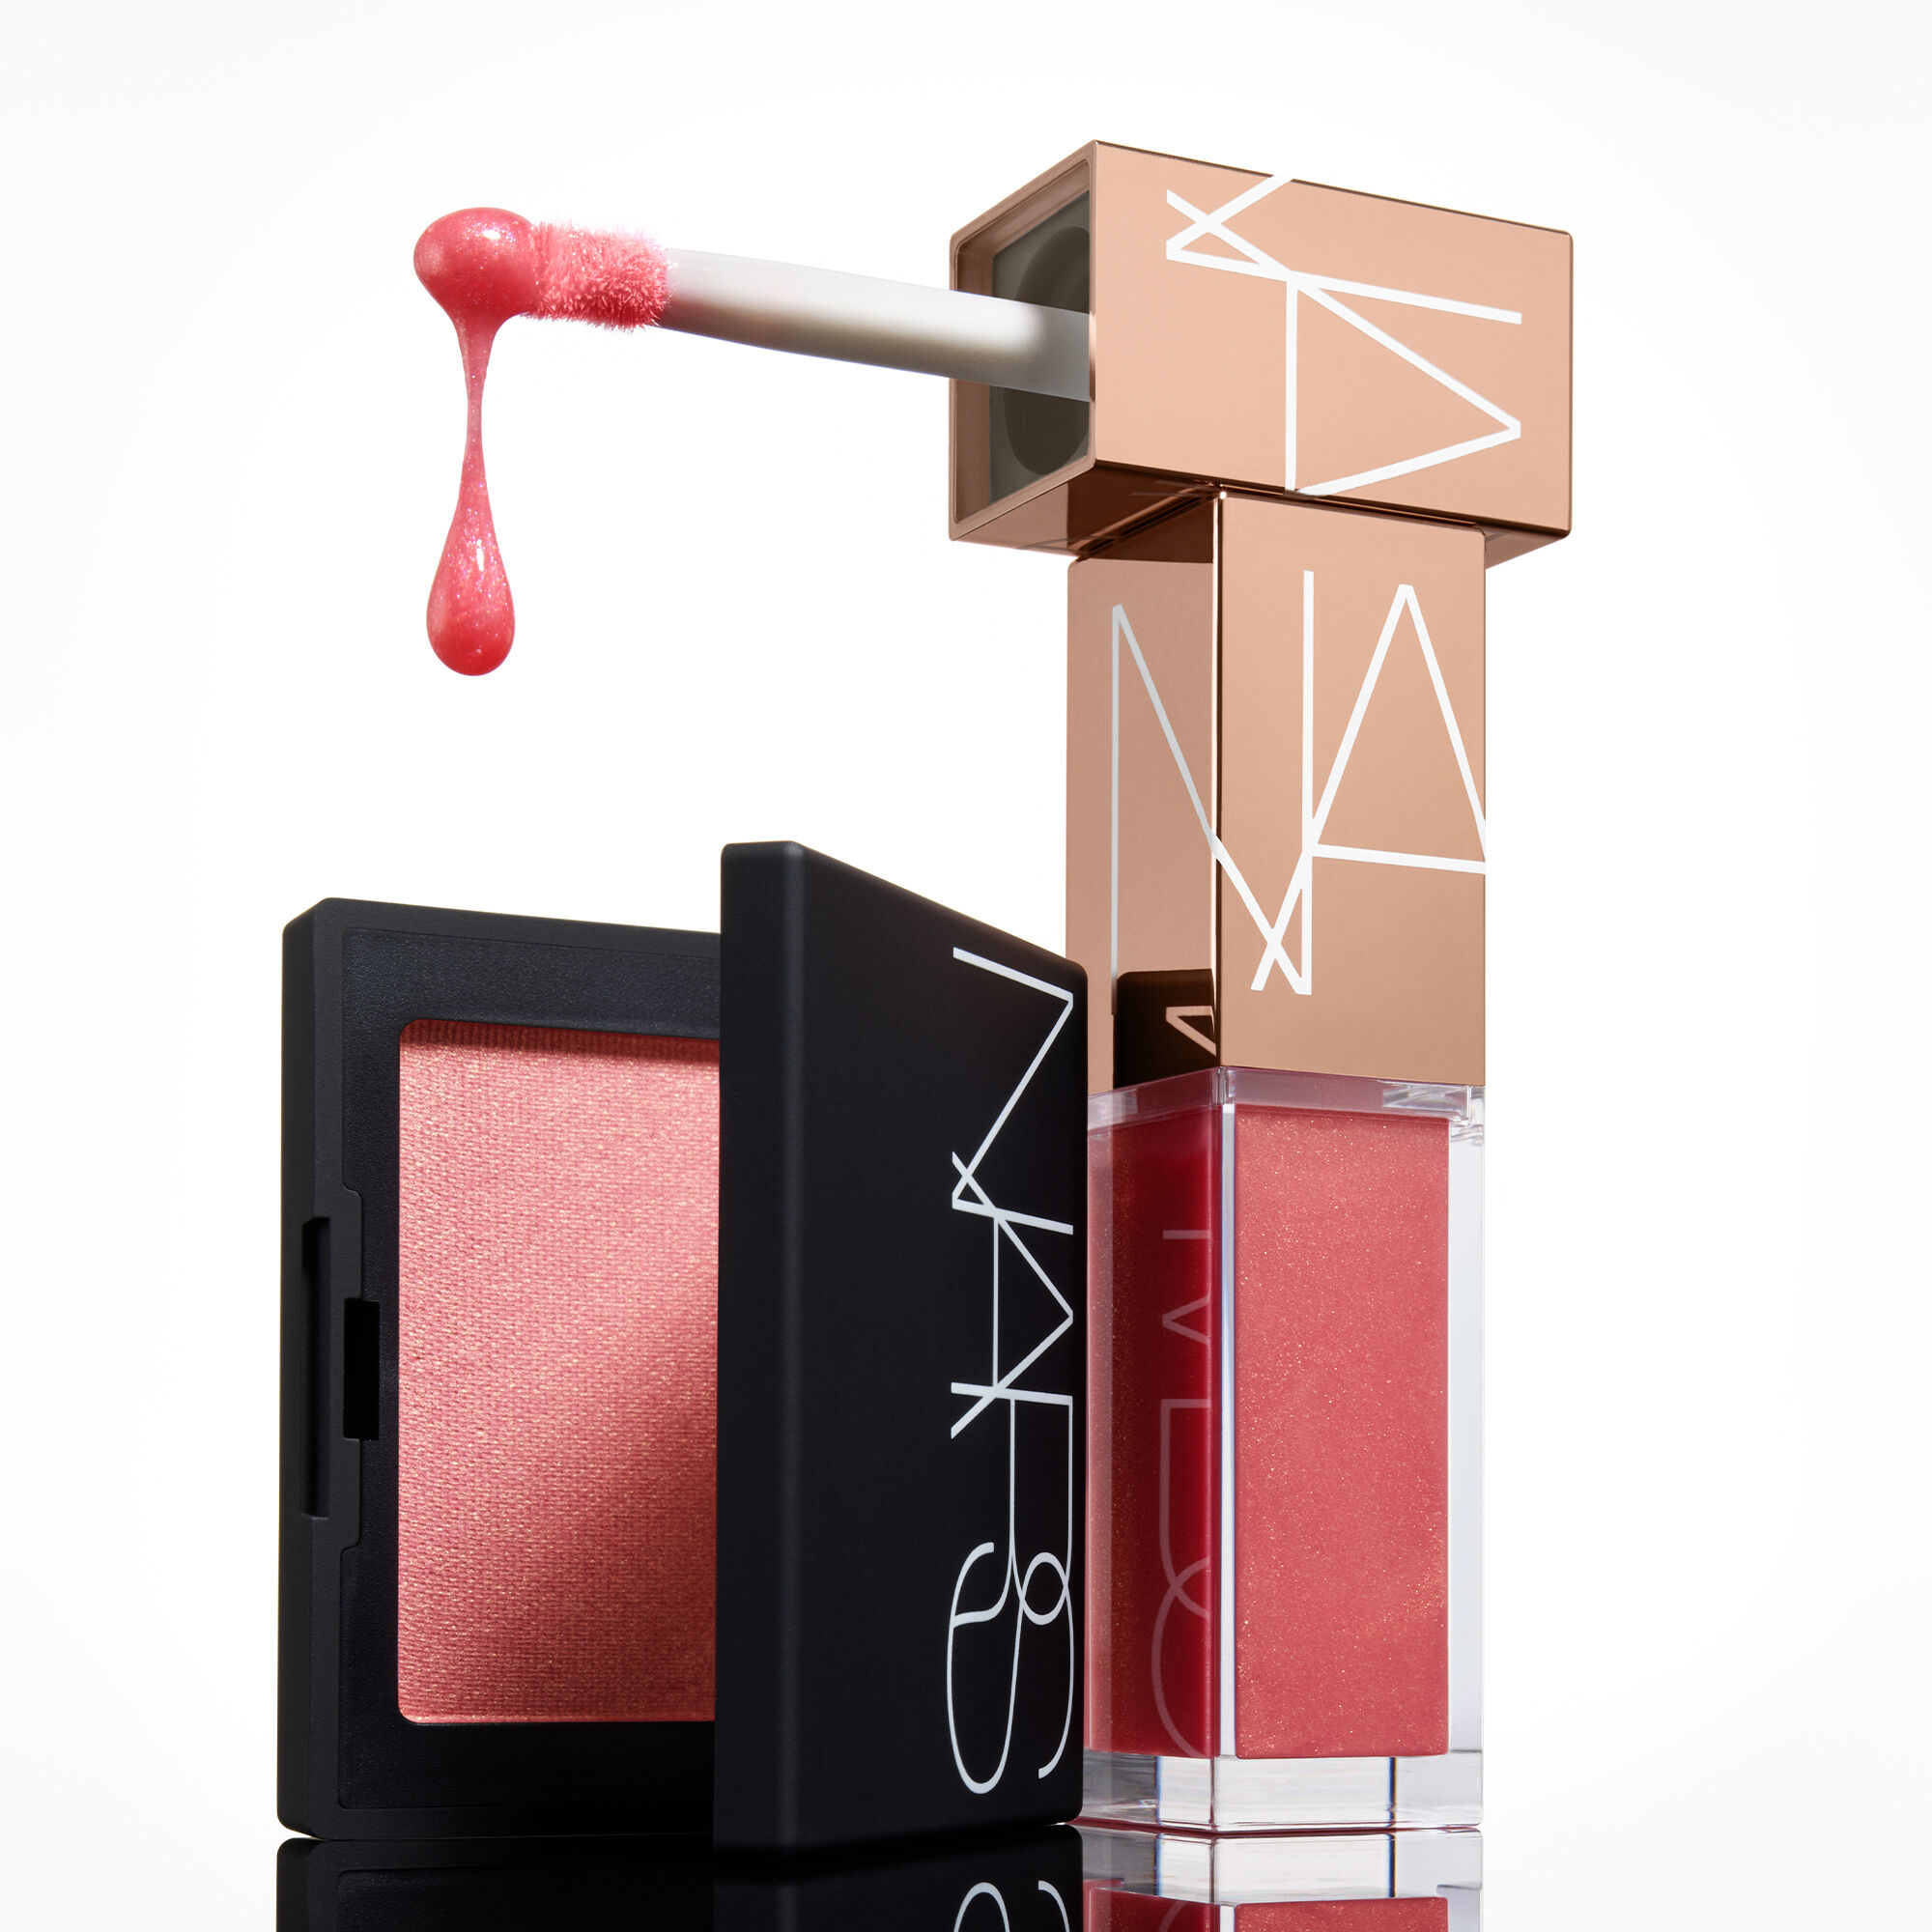 Just Arrived: New NARS Makeup Products | NARS Cosmetics